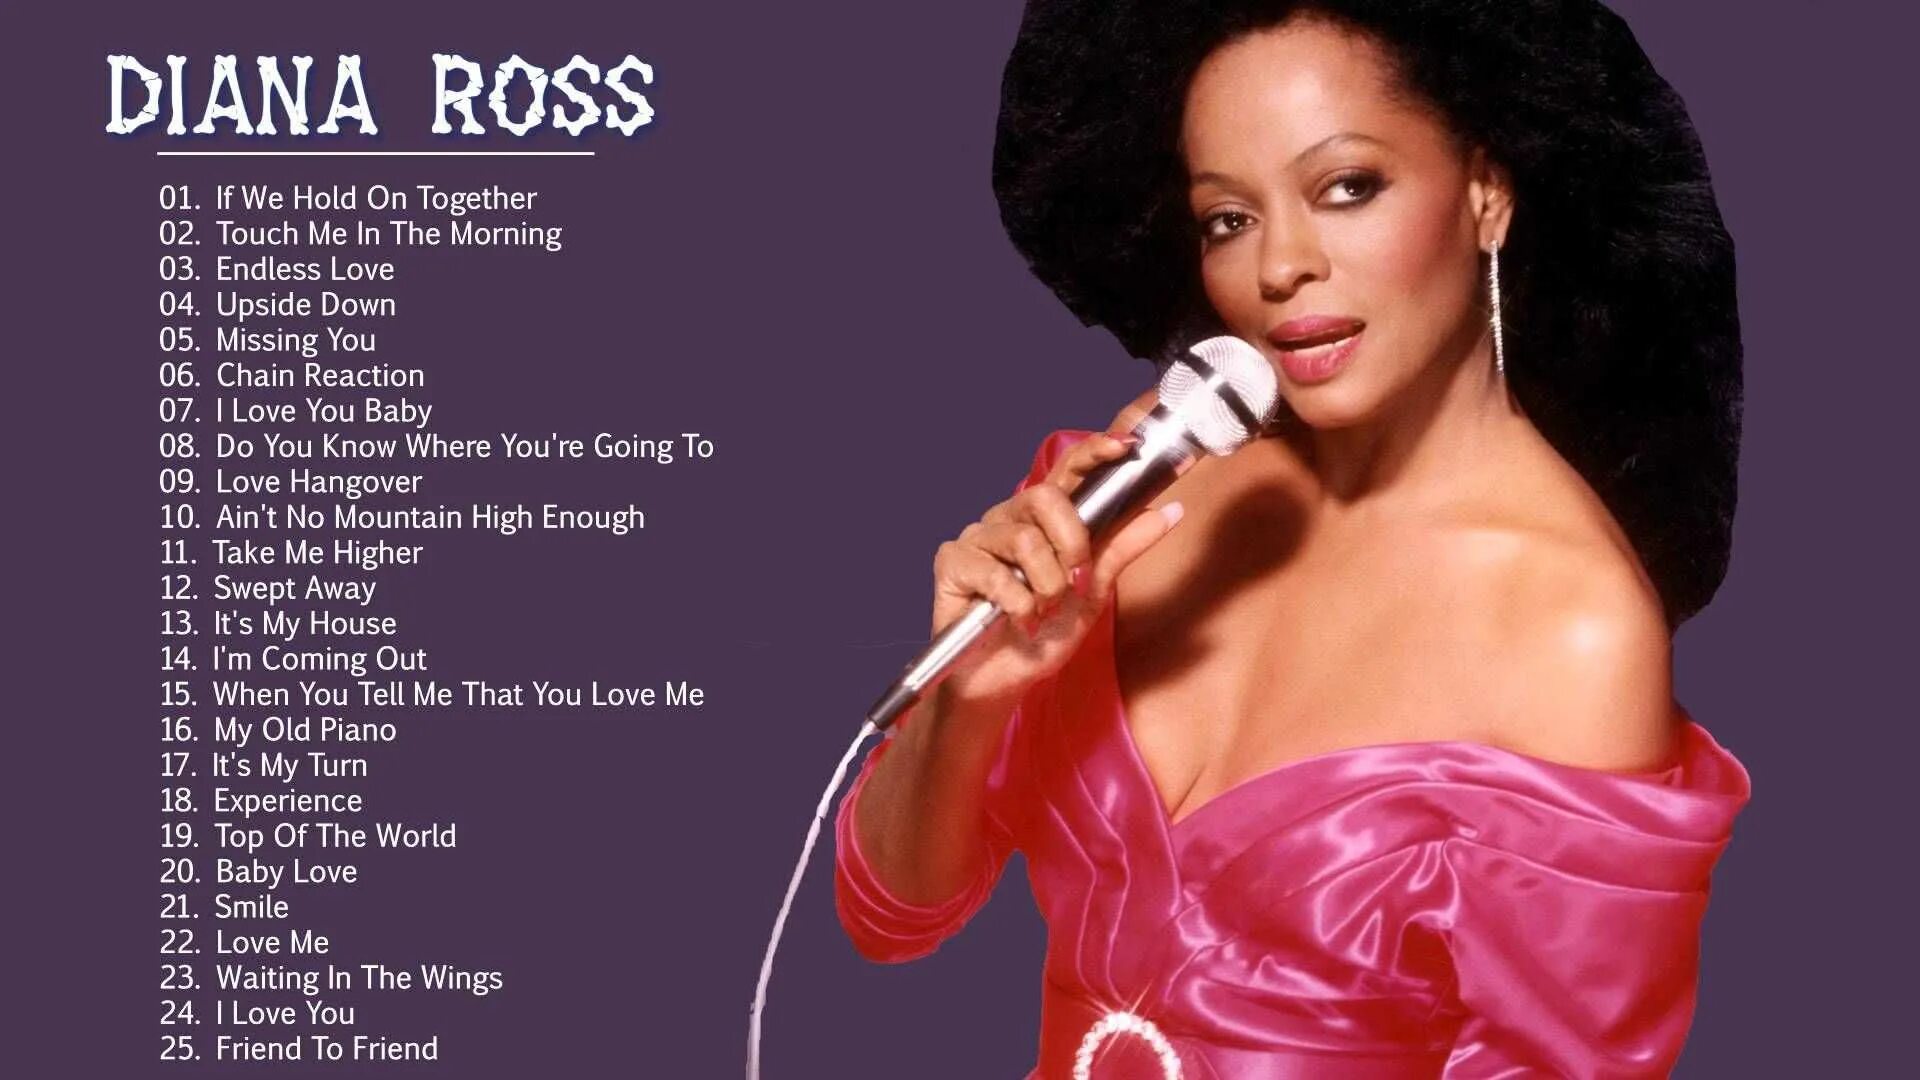 Diana Ross 2023. Diana Ross 1970. The Boss Дайана Росс. Diana Ross Дайана Росс. Песня disco cone take it high